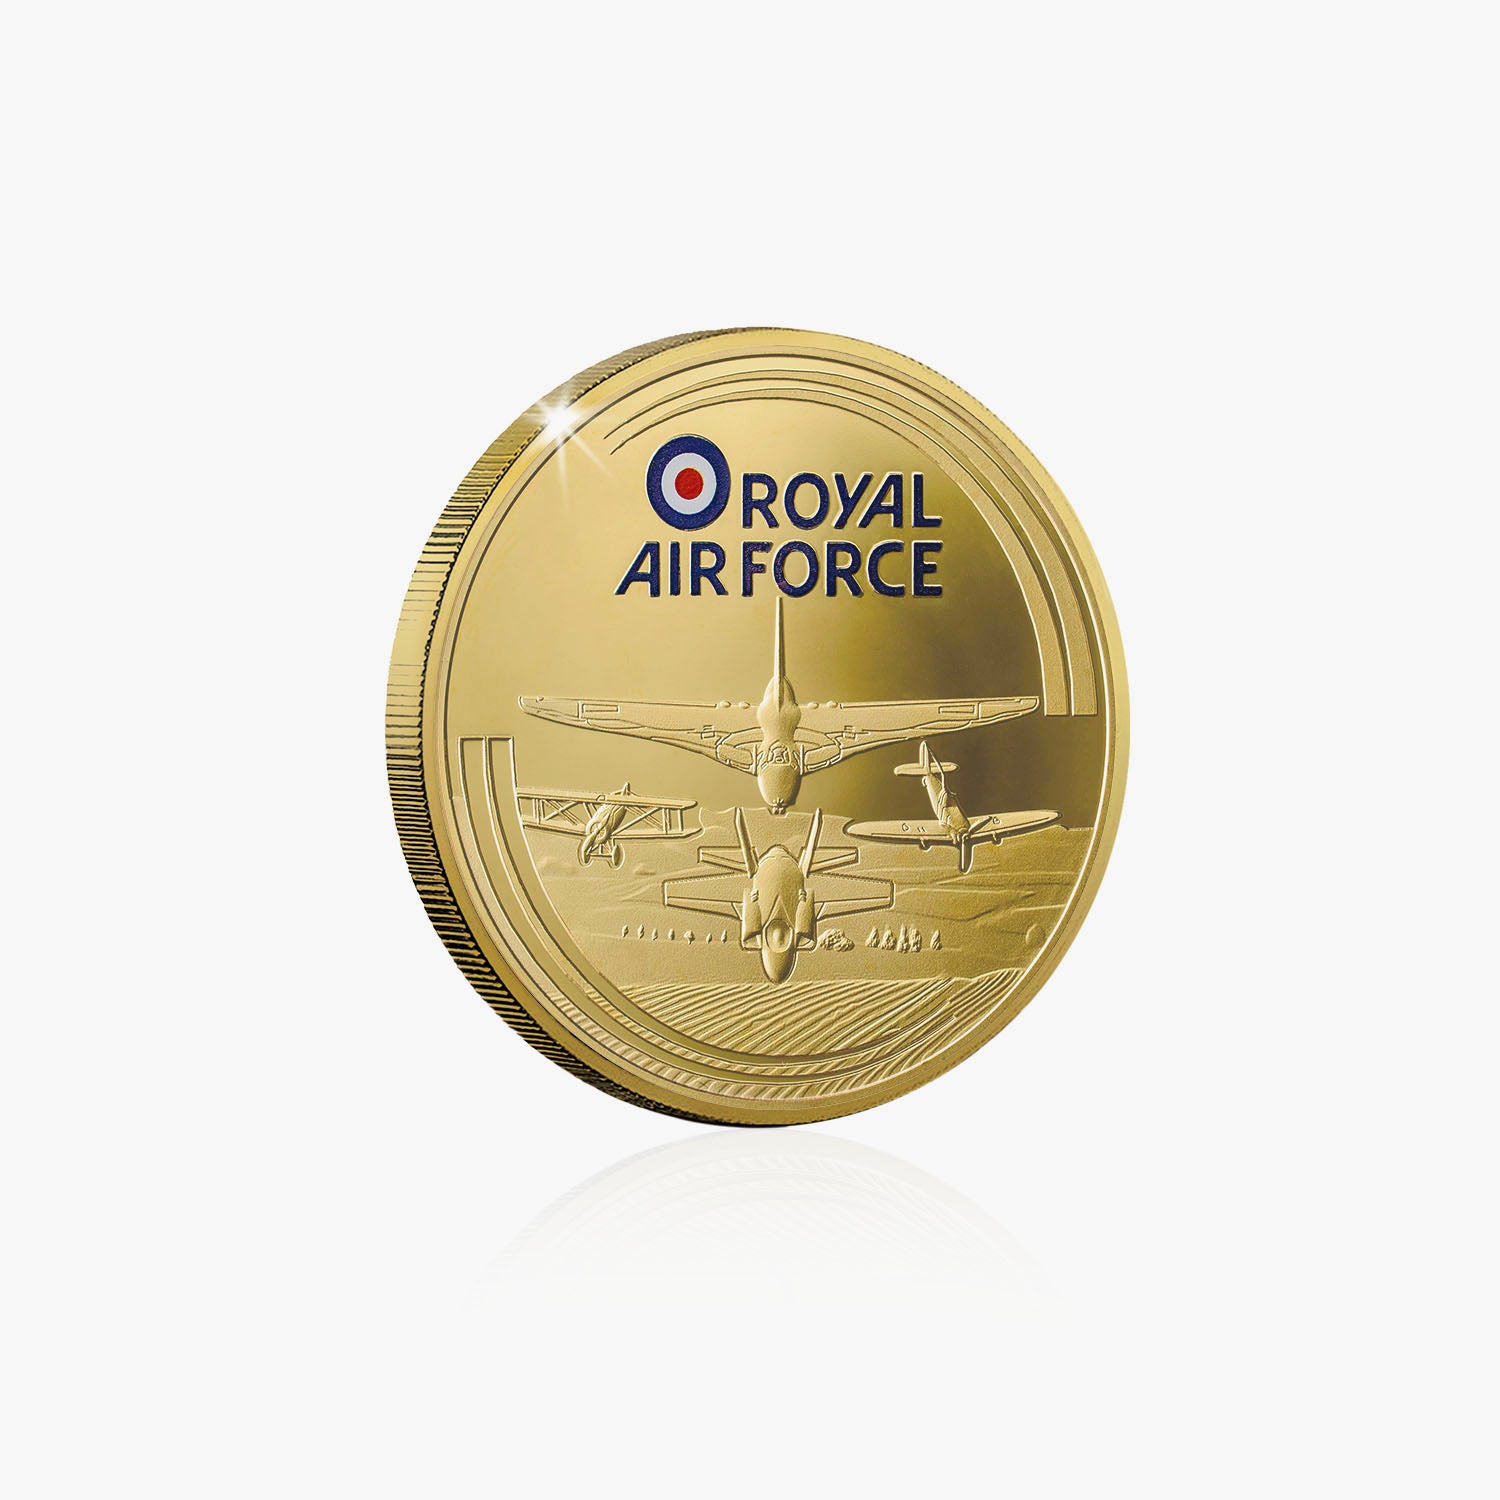 Ascent To The Skies Gold-Plated Commemorative